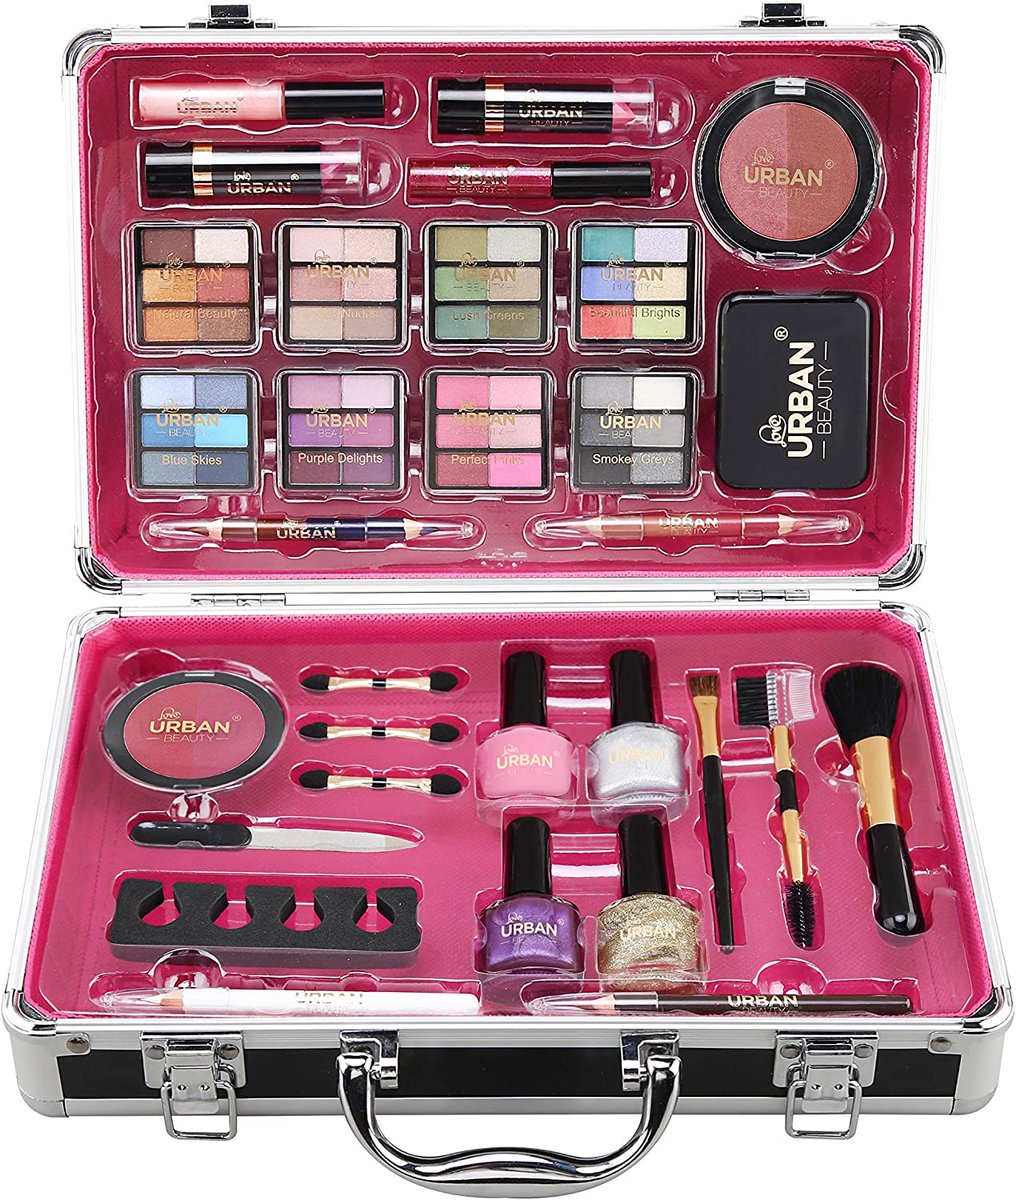 Makeup Deal of the Day - 43% off this fab set from Urban Beauty.
amzn.to/3i7gsAK
#makeup #JanuarySales #MHHSBD